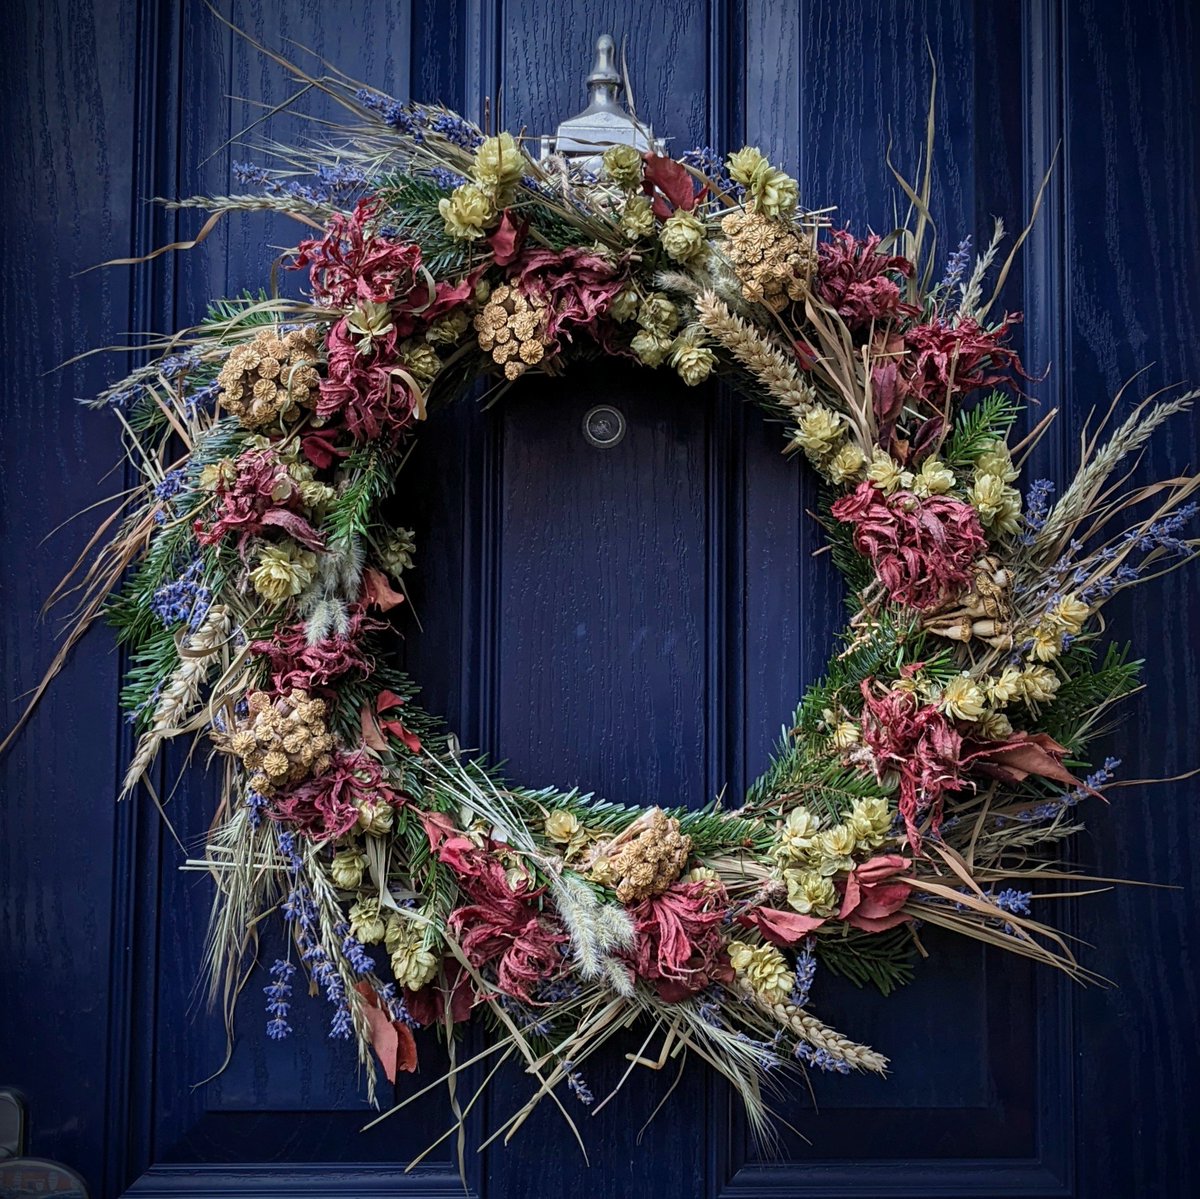 This year's wreath, including lavender from a visit to @CastleFarmKent earlier this year and conifer foliage kindly given to me by a friend. Everything else is from the allotment or garden. I'm chuffed with it!